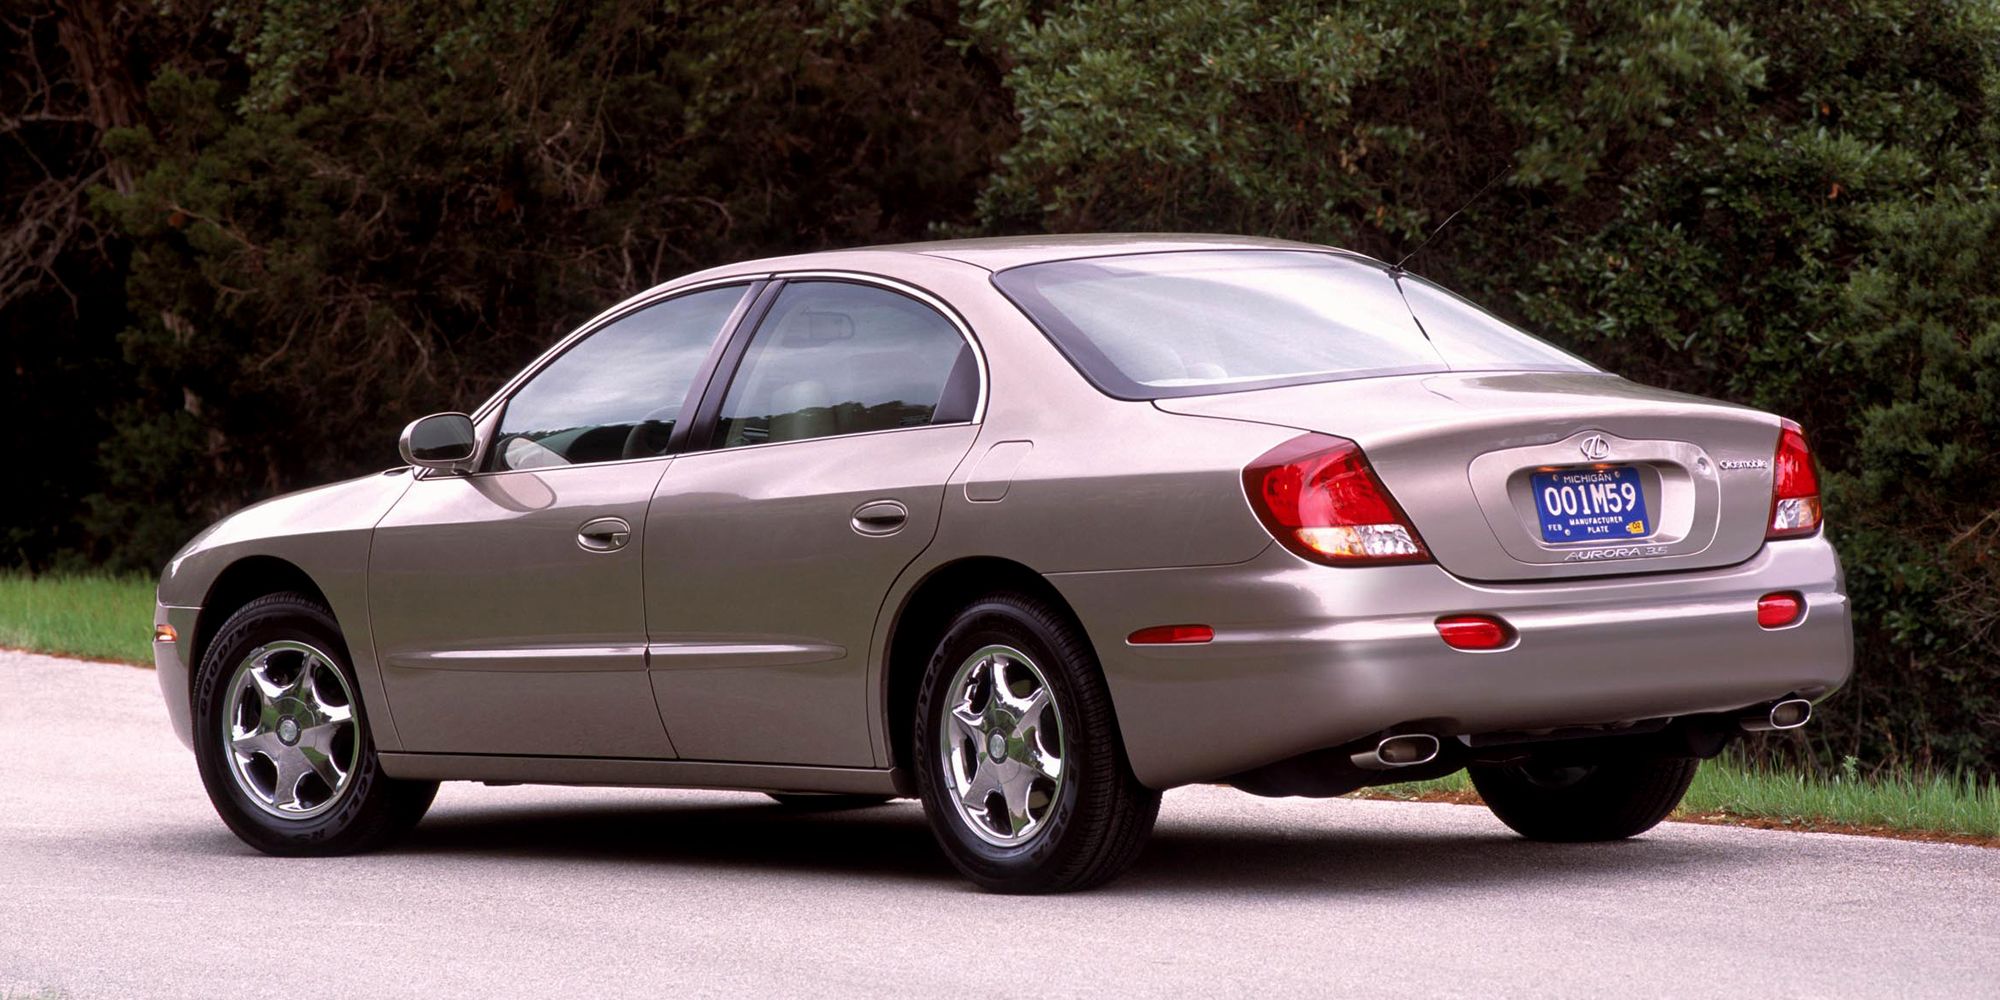 Rear 3/4 view of the Oldsmobile Aurora